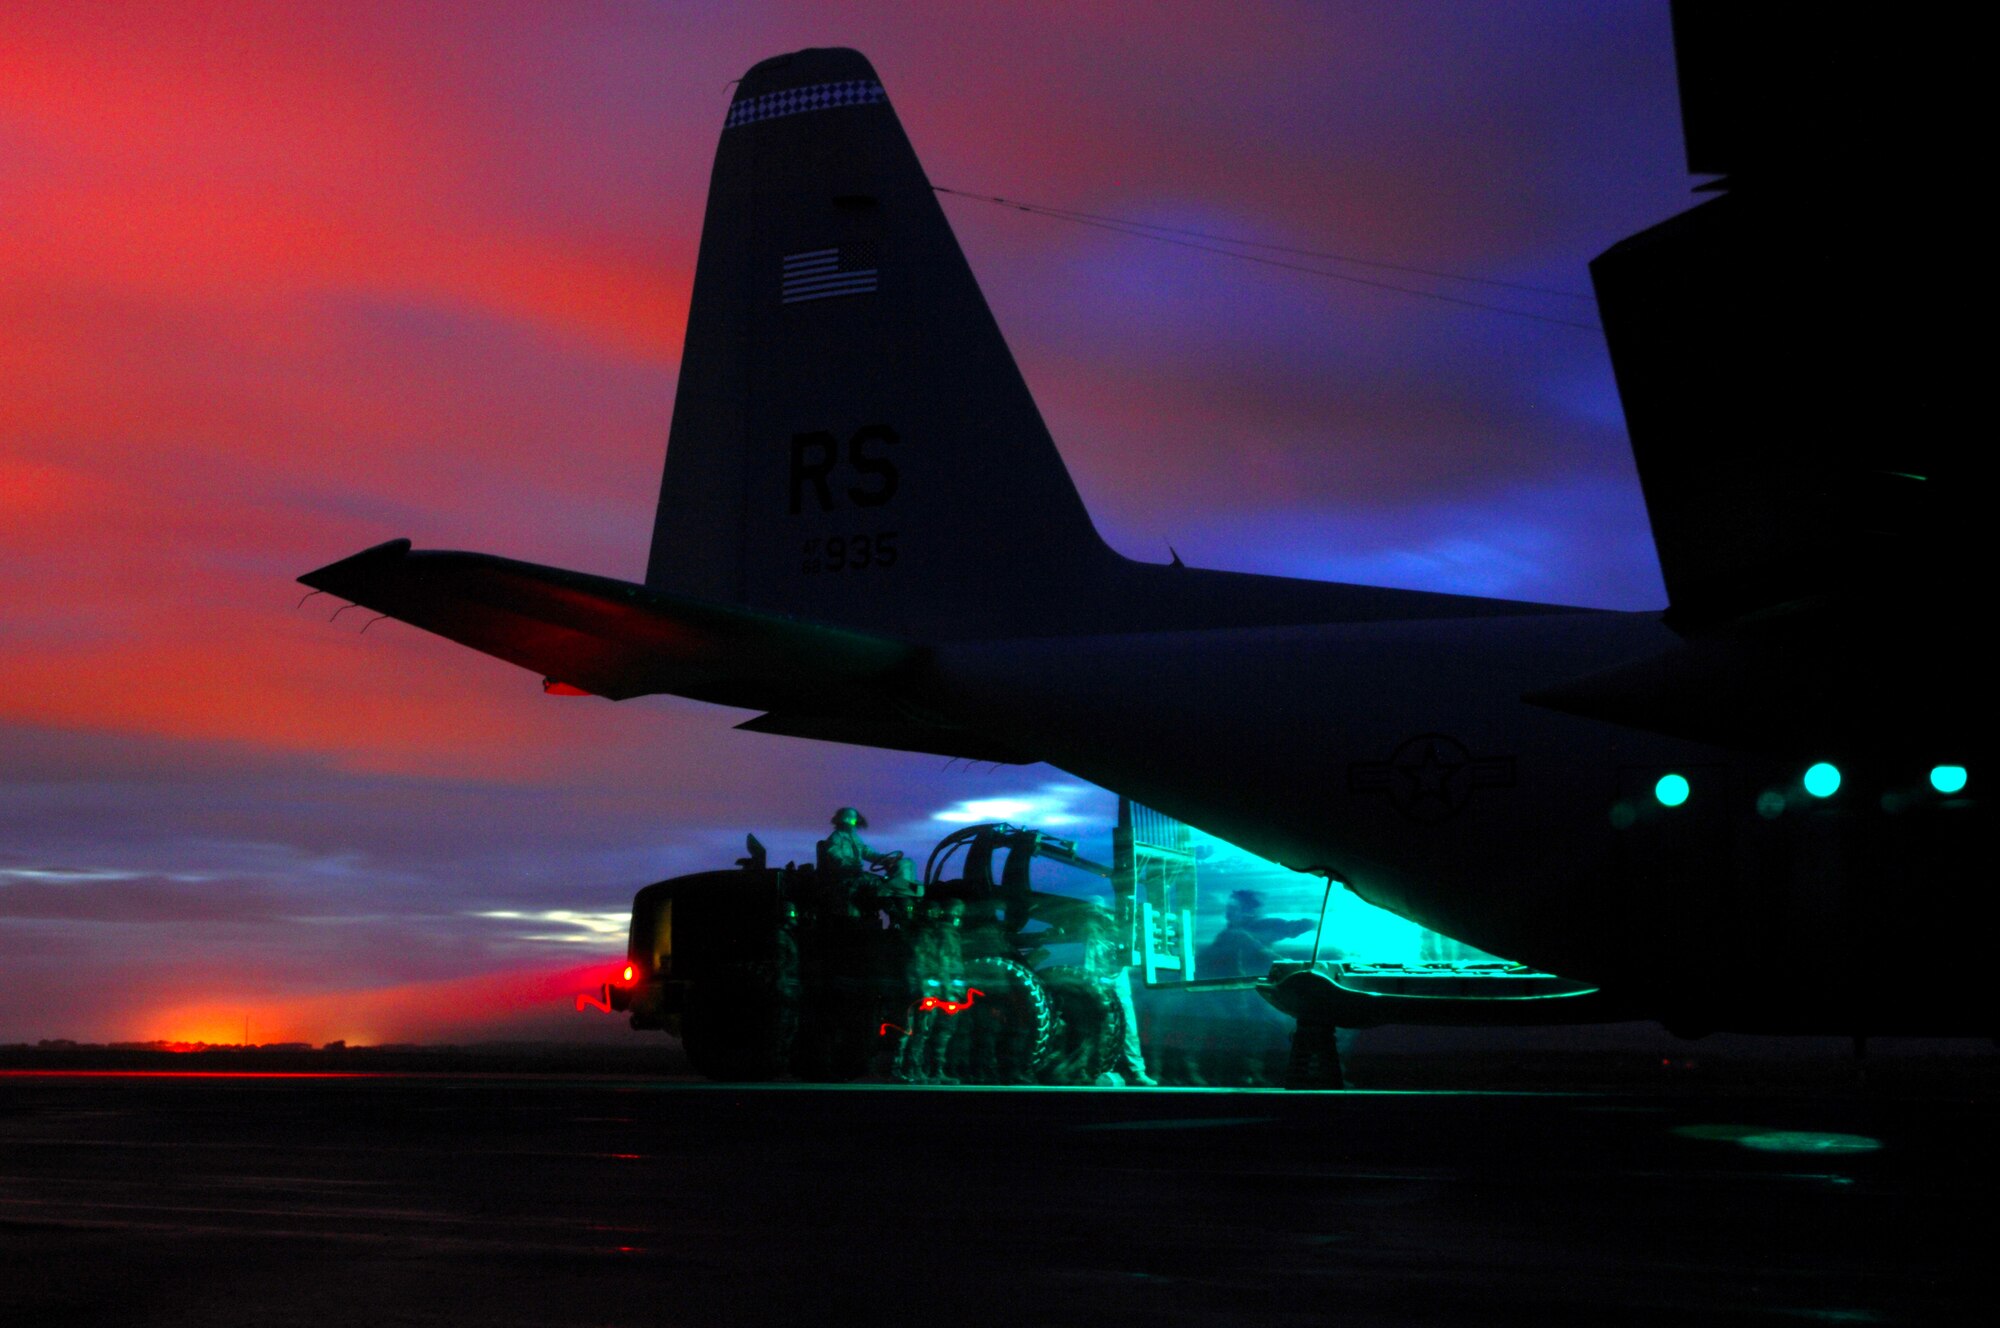 United States Air Force personnel participating in an eight day Operational Readiness Exercise prepare to load a C-130 Hercules to depart West Freugh Airfield, Scotland, May 19, 2009, where a portion of the exercise was held. (U.S. Air Force photo by Senior Airman Kenny Holston)